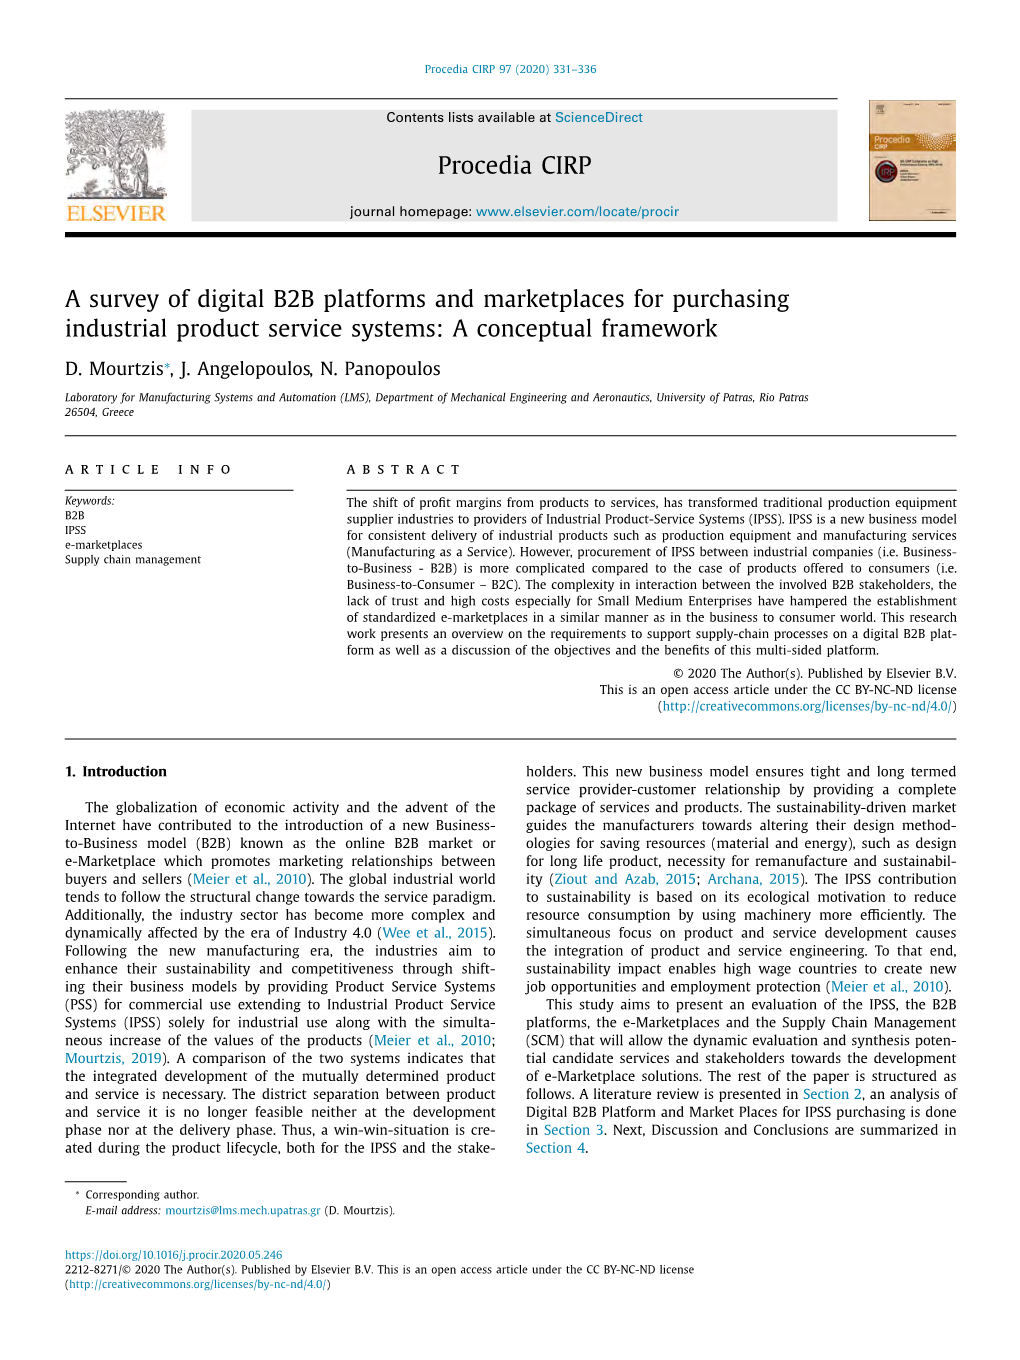 A Survey of Digital B2B Platforms and Marketplaces for Purchasing Industrial Product Service Systems: a Conceptual Framework